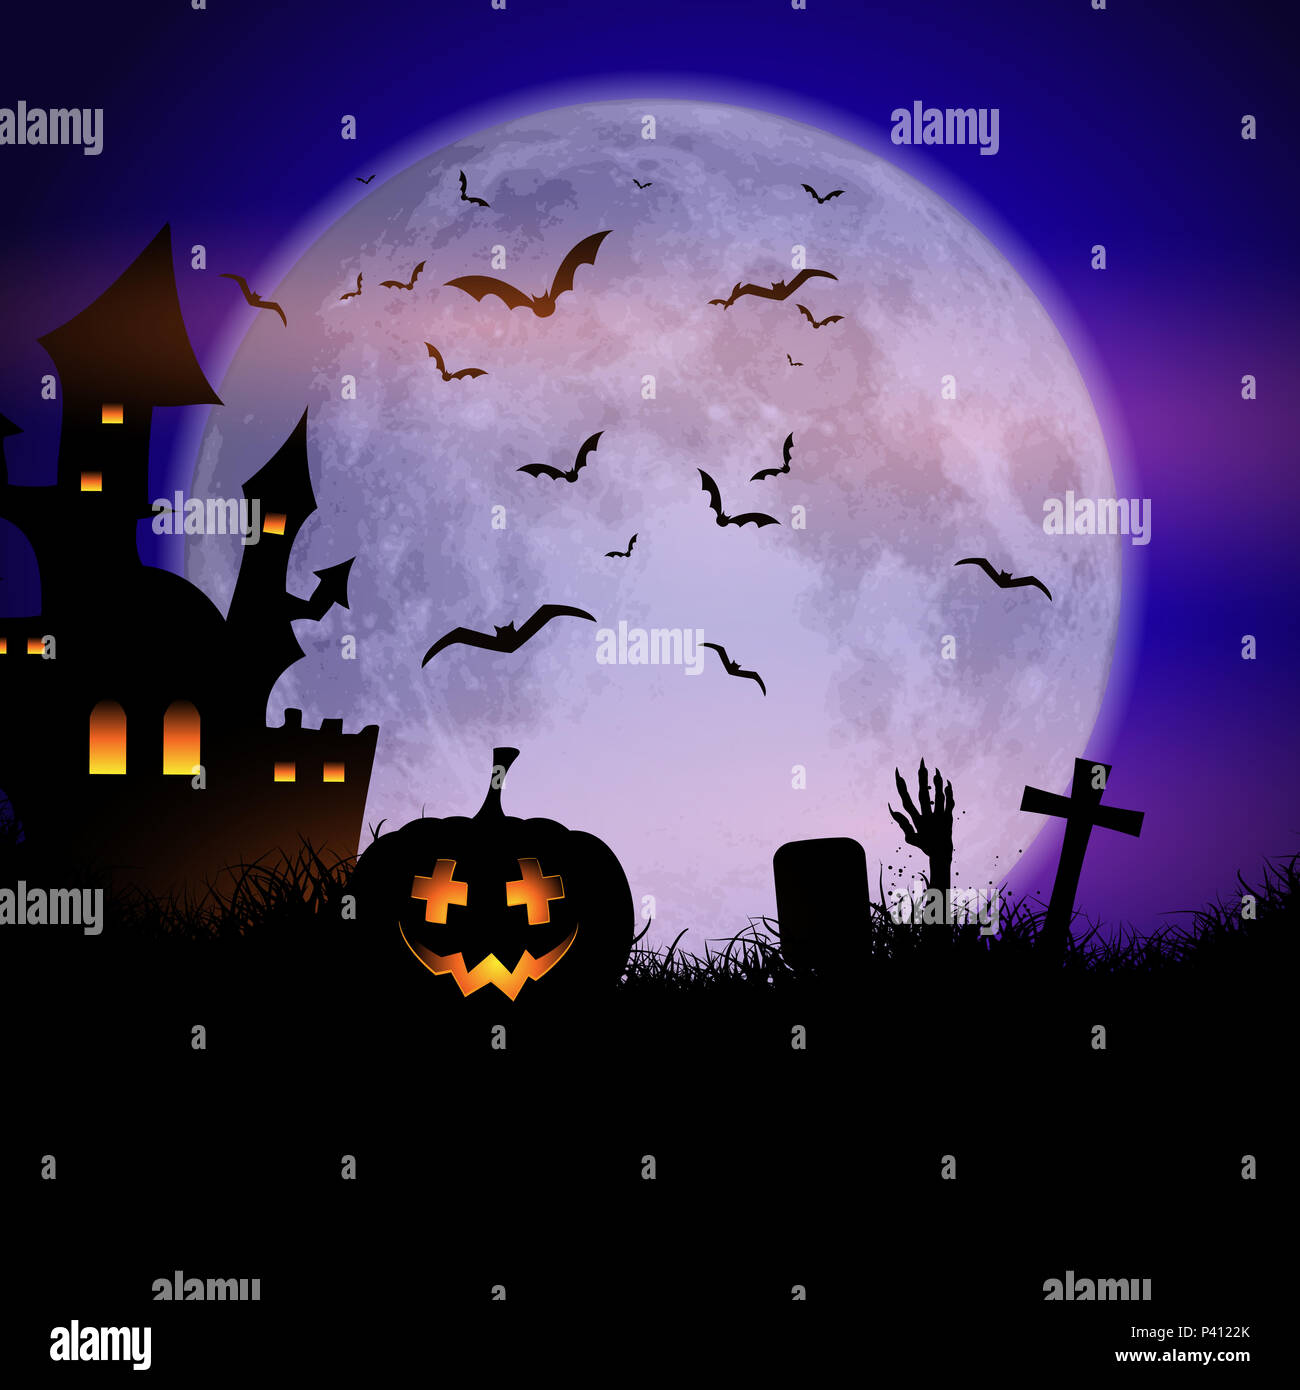 Spooky Halloween background with haunted house and pumpkins Stock Photo